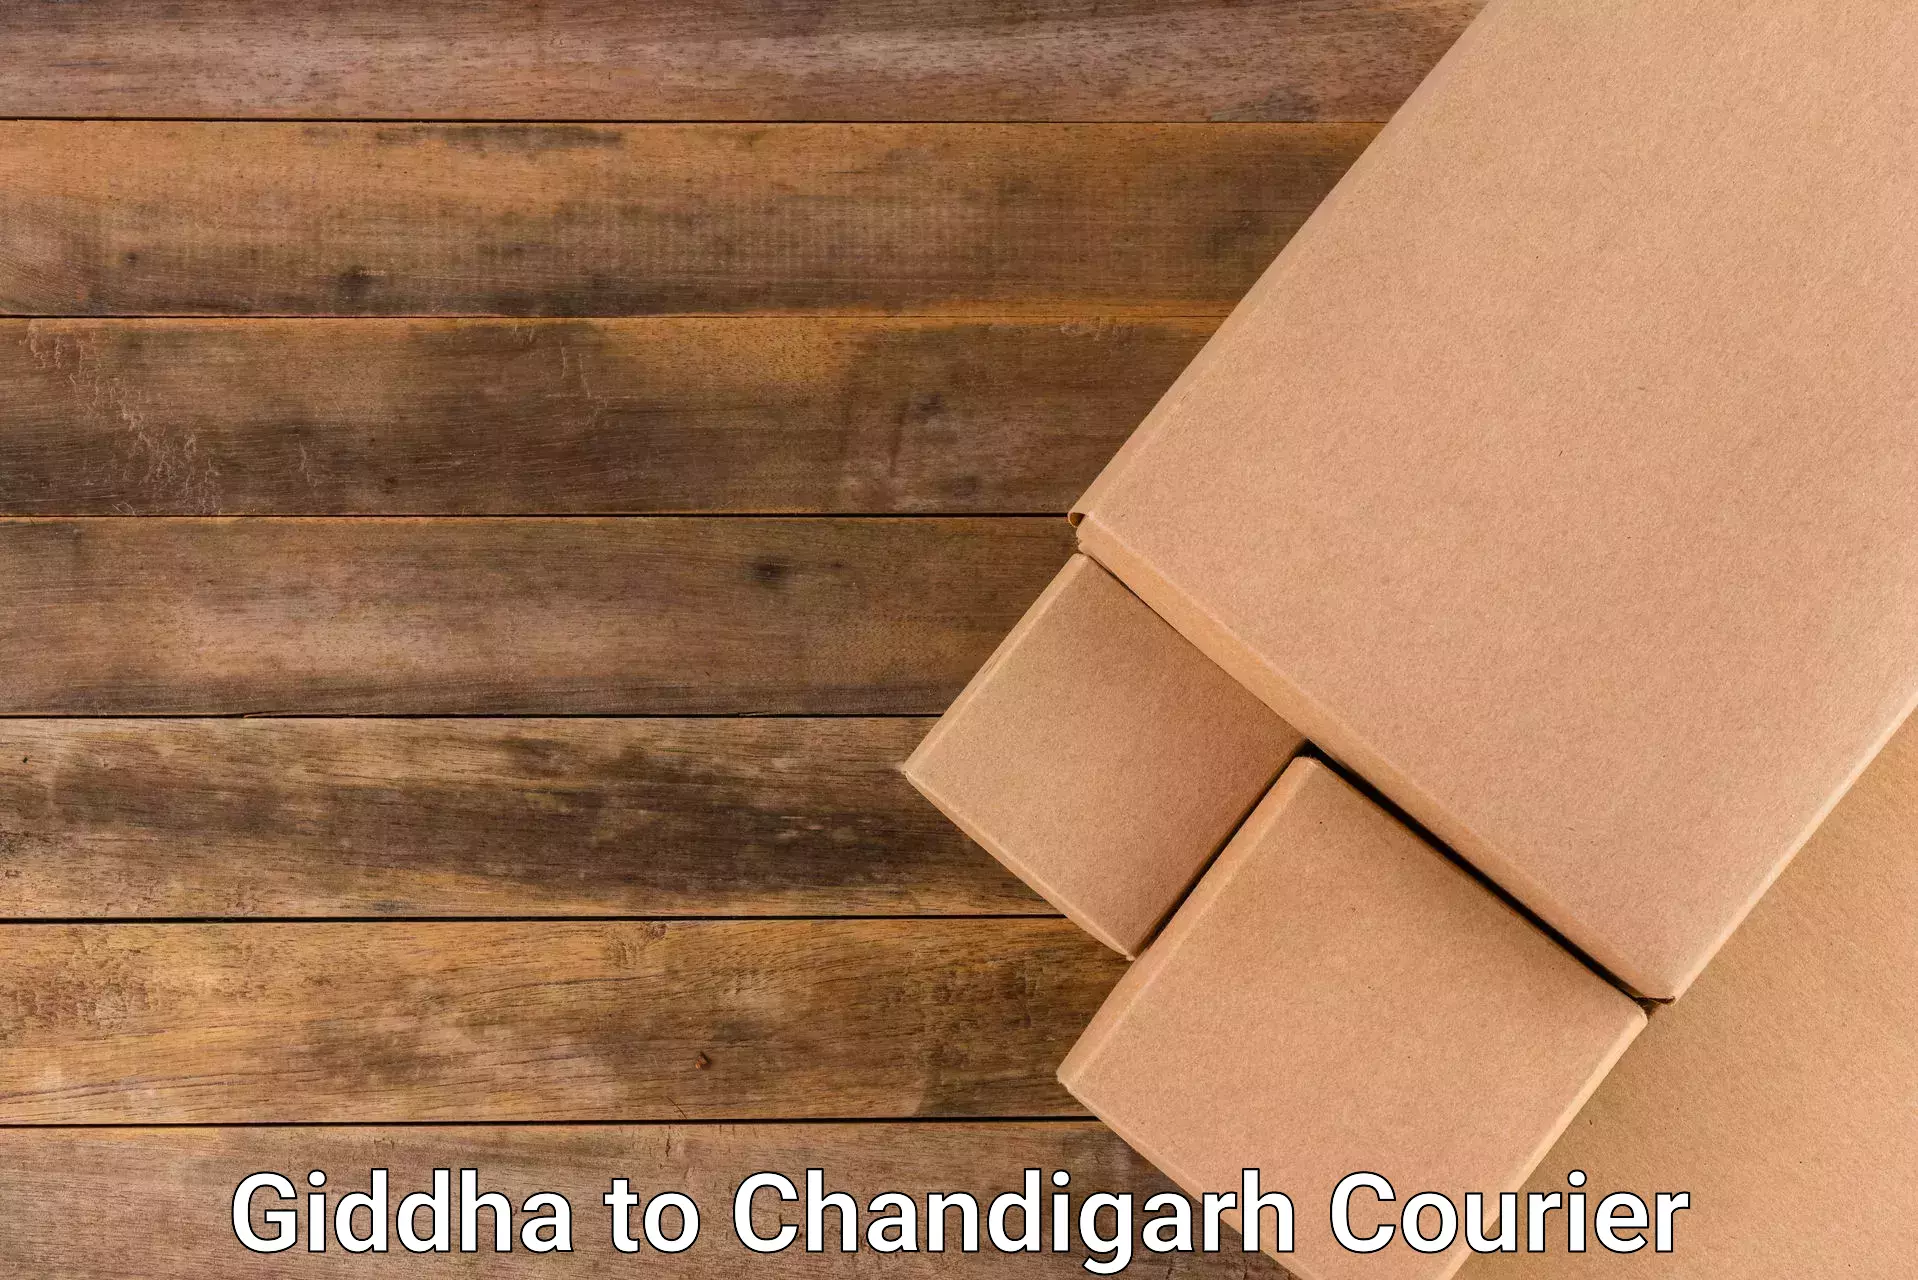 Affordable logistics services Giddha to Chandigarh